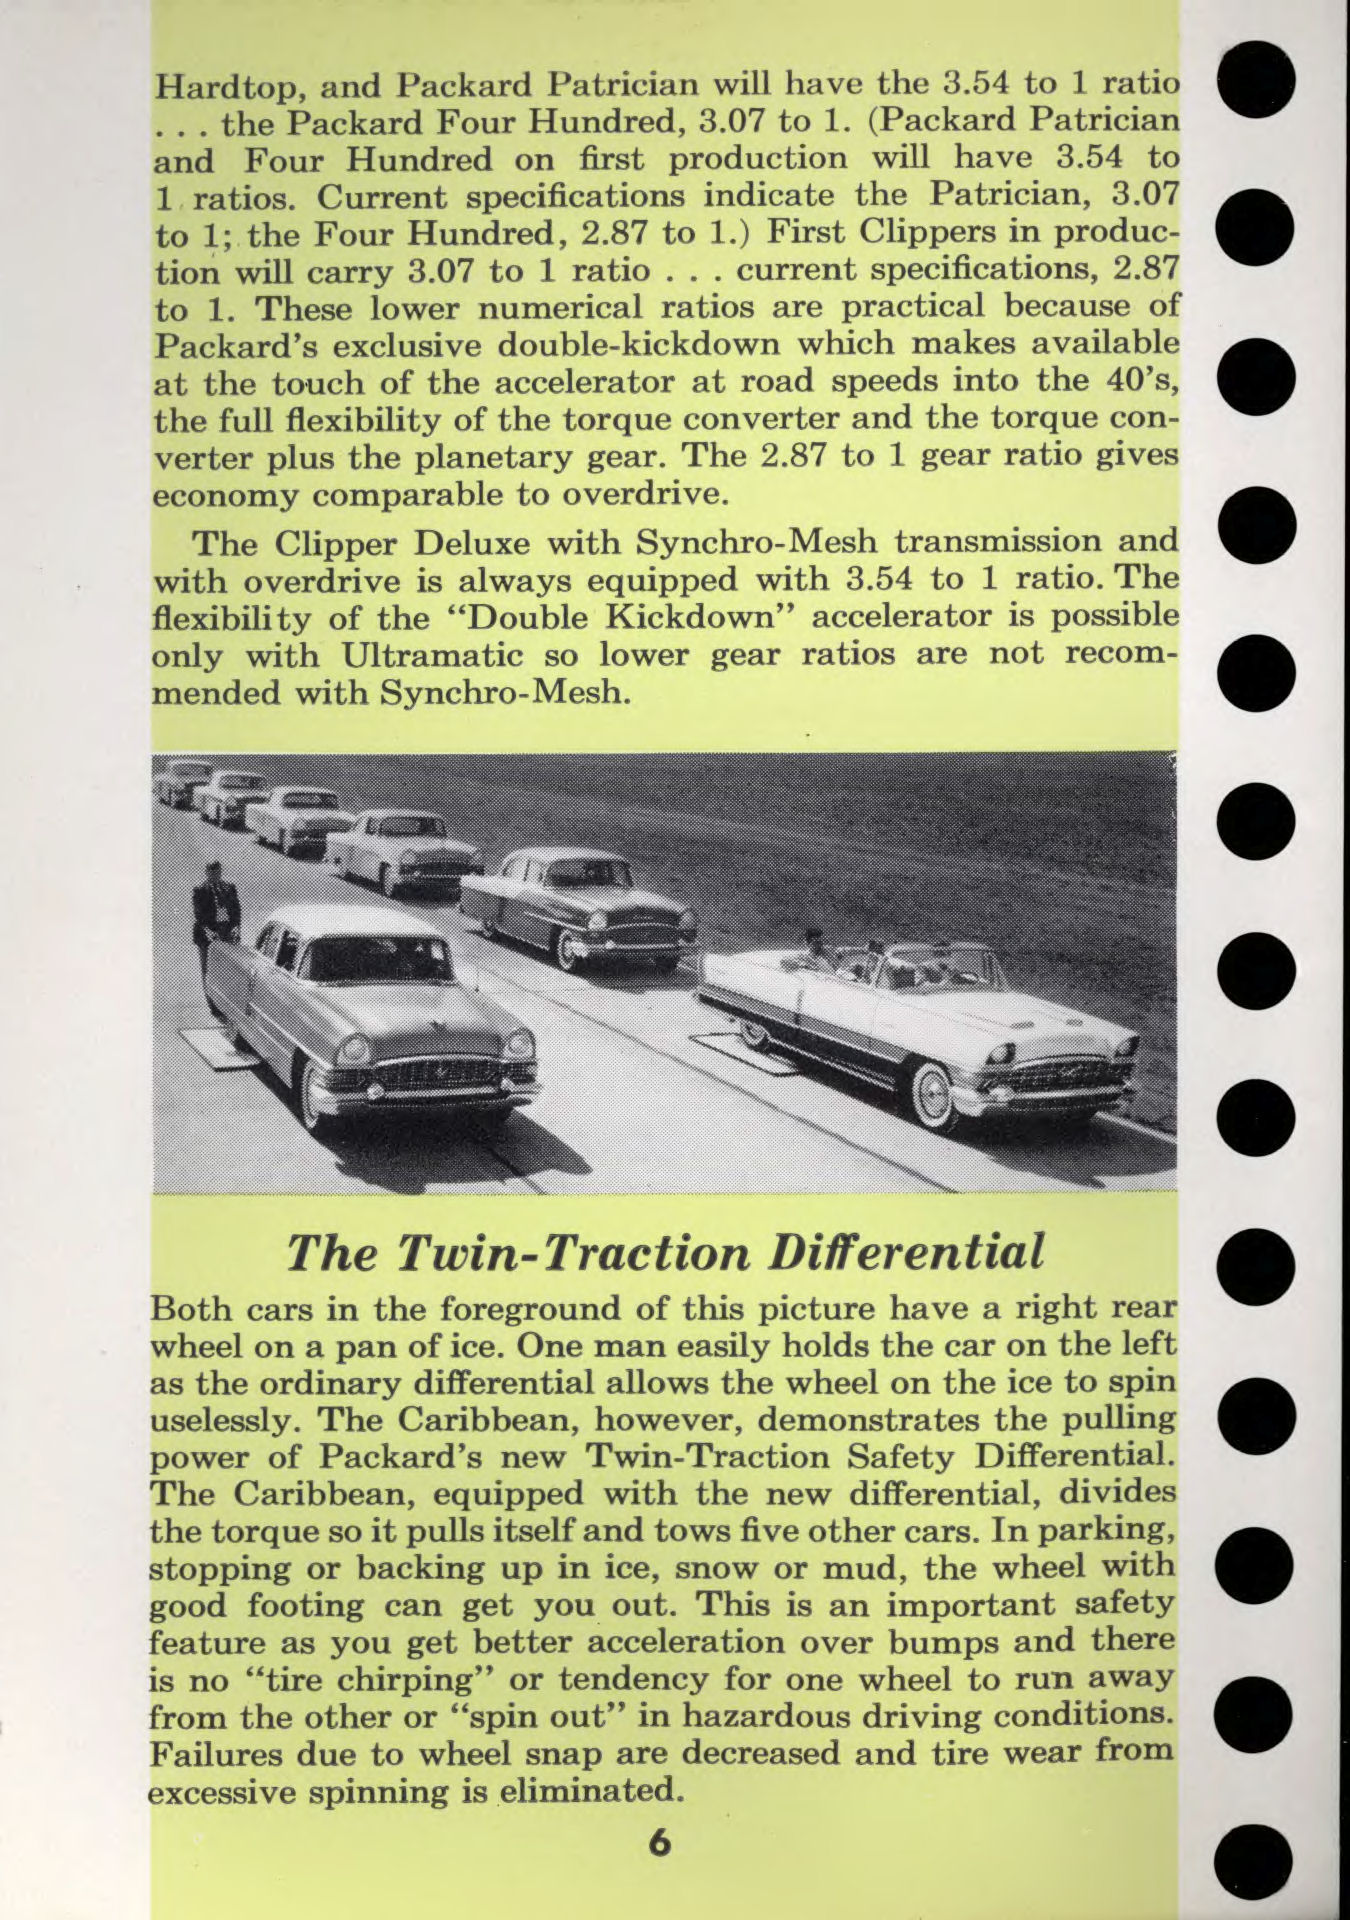 1956 Packard Data Book Page 11